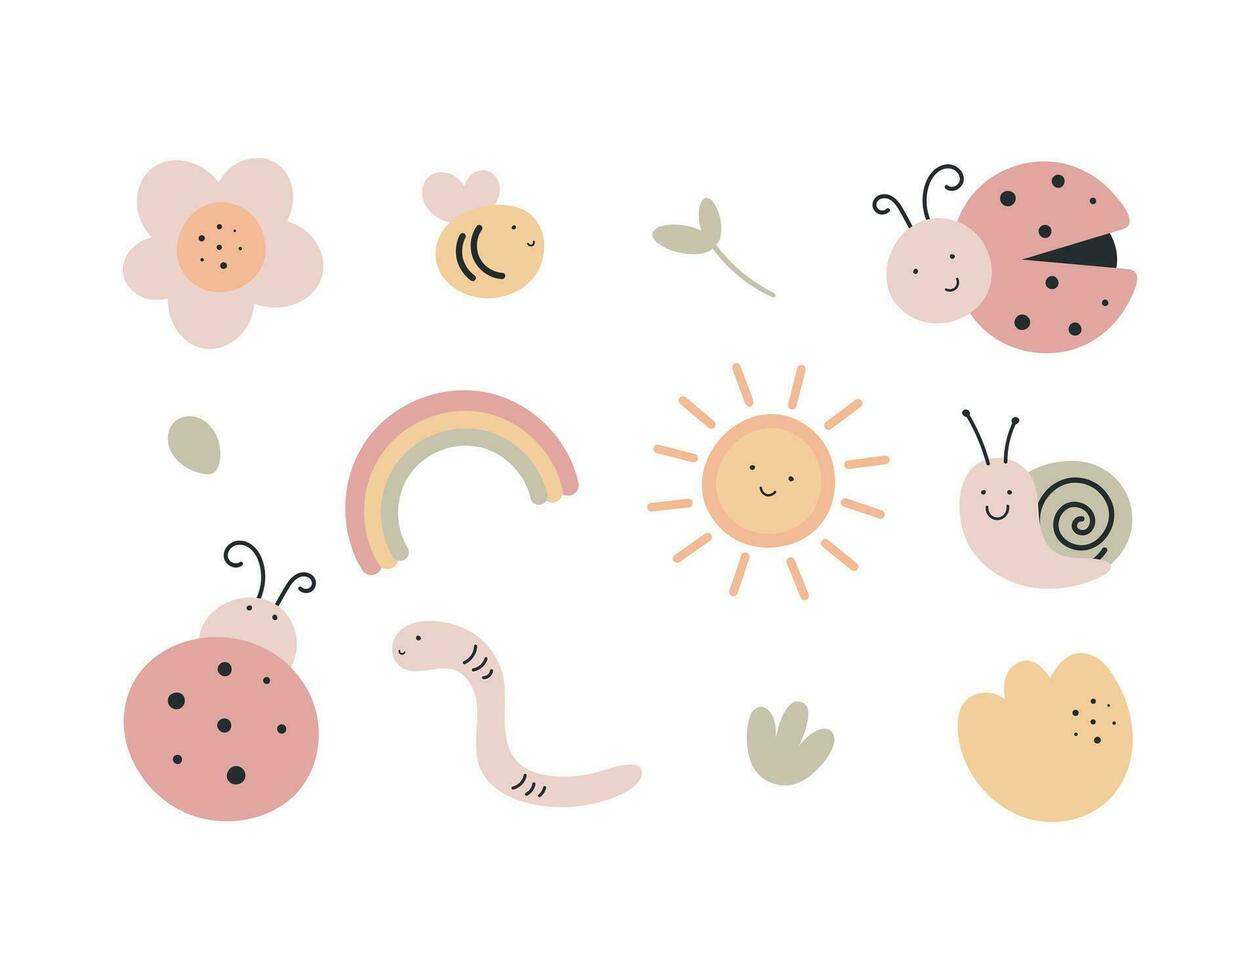 Set with cute insects, flowers. Colorful vector illustration in a flat style. Bee, ladybug, worm, rainbow, sun, snail and flowers isolated on a white background.